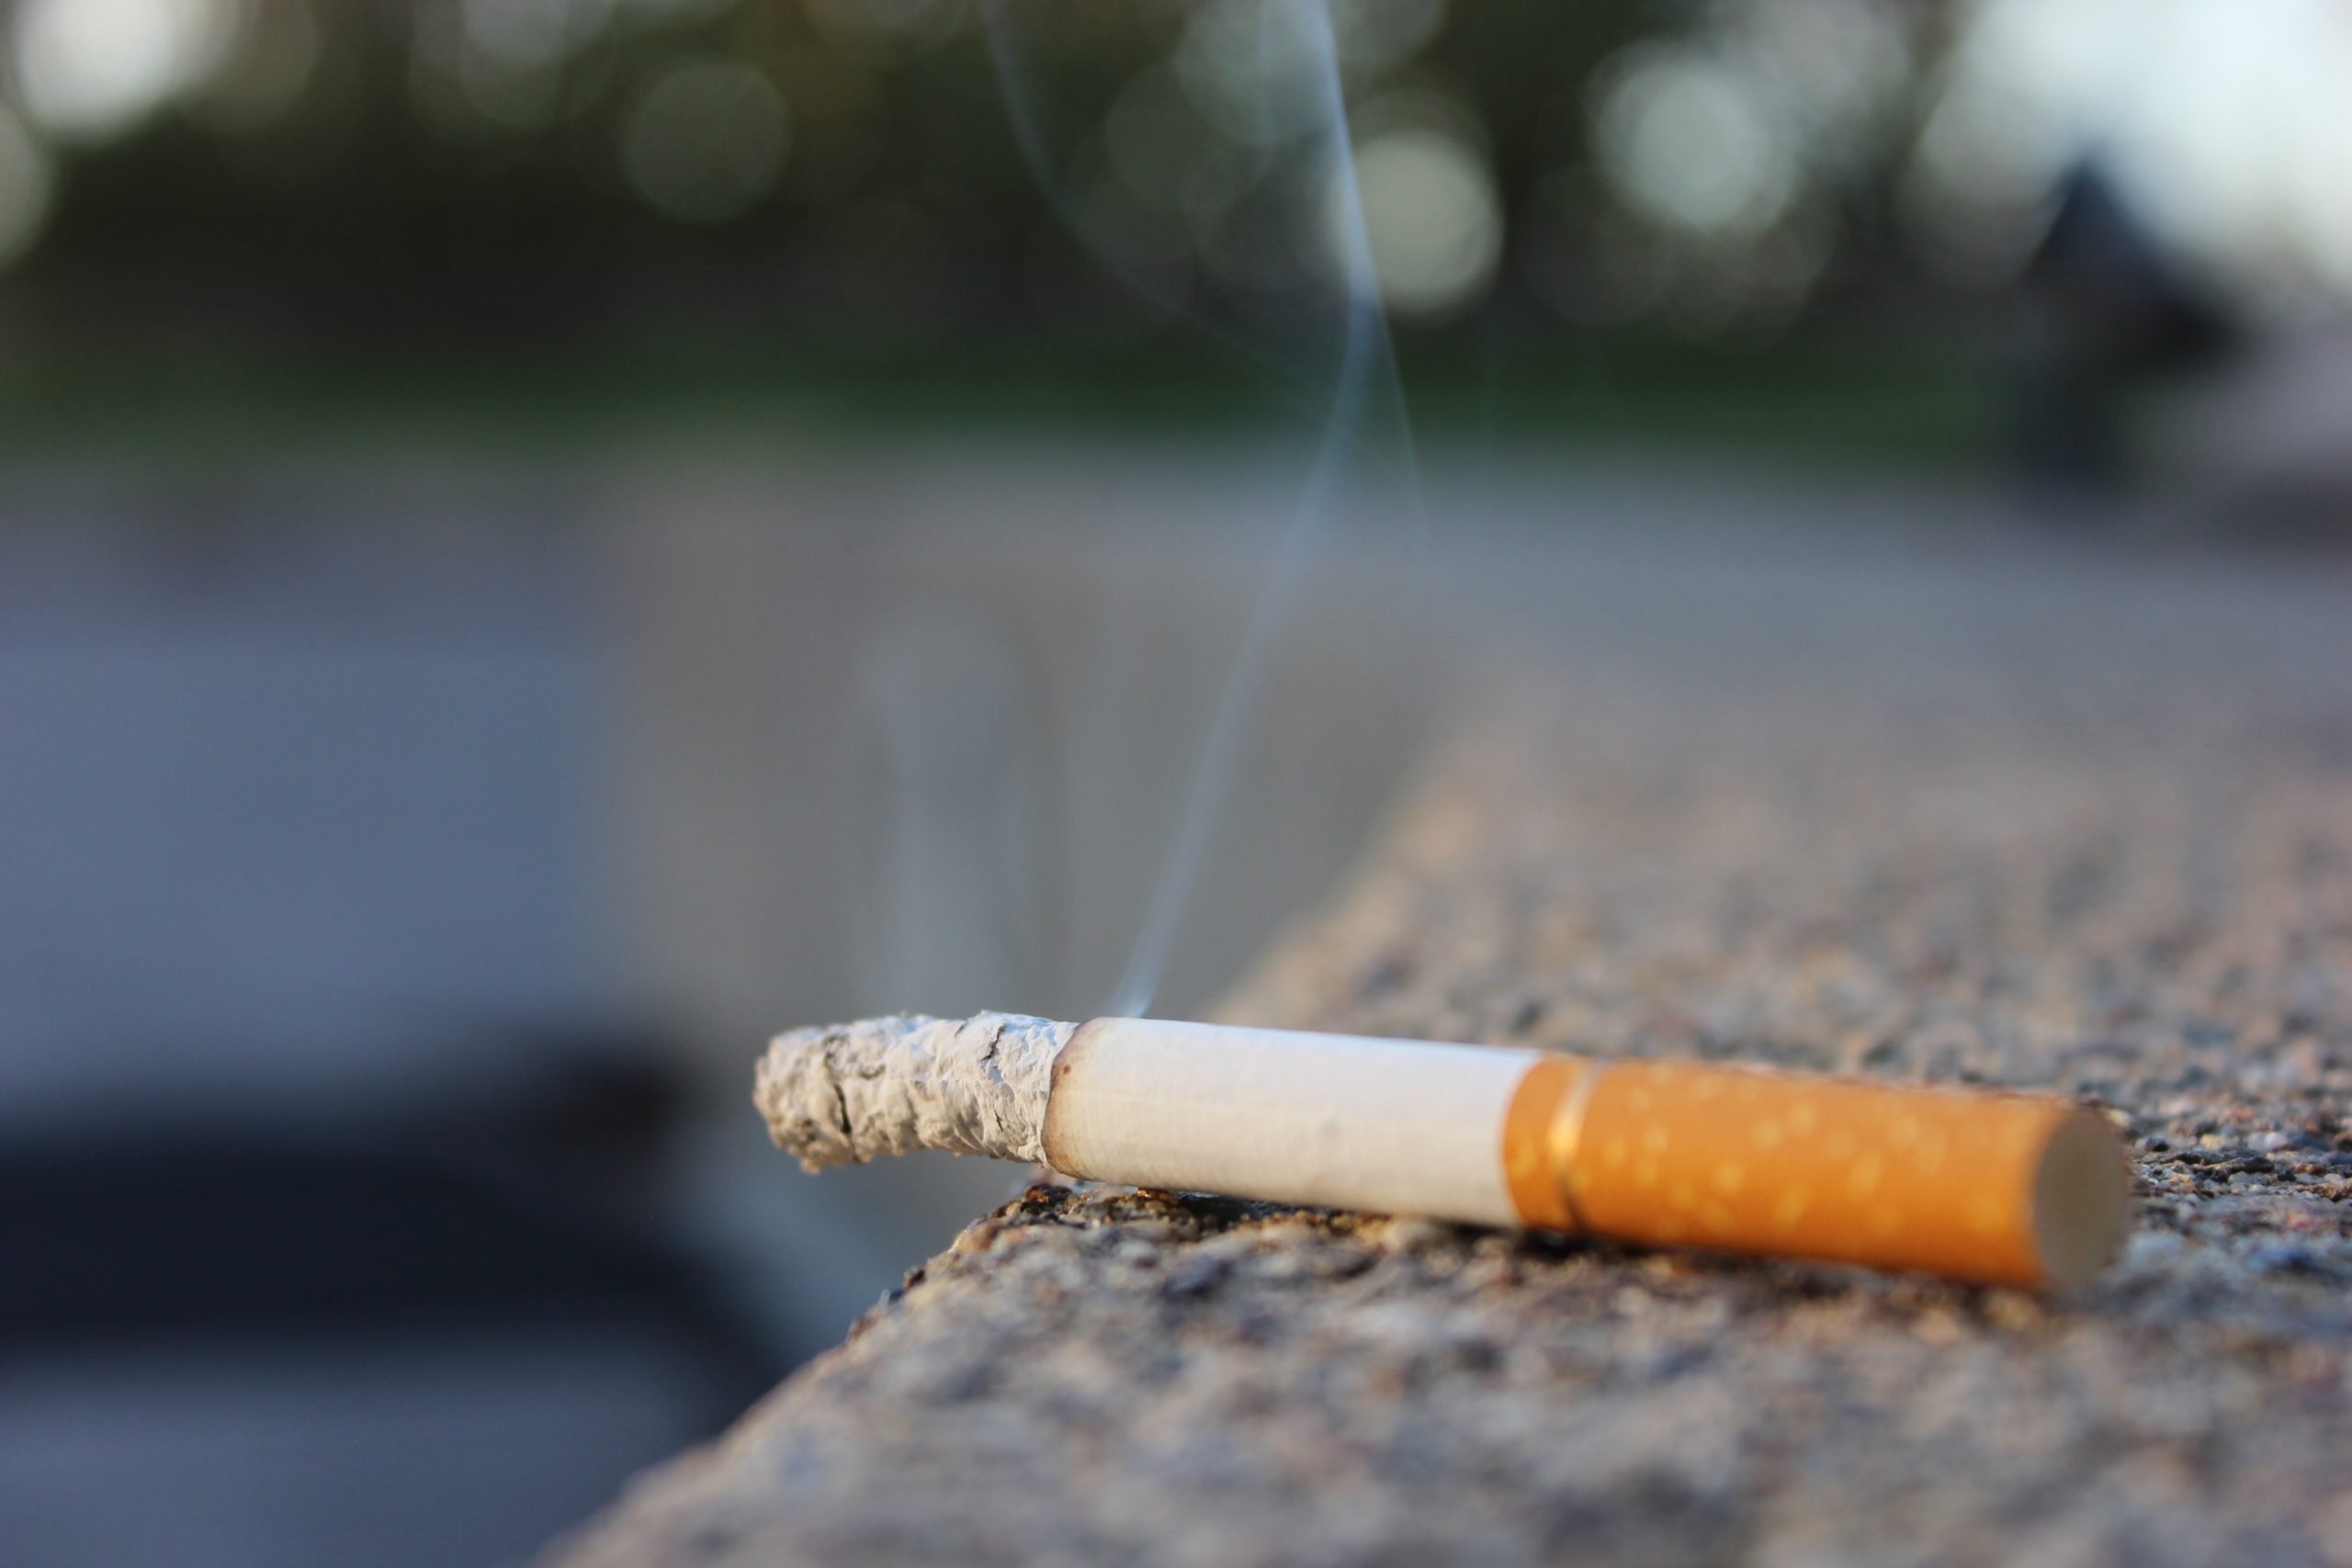 Many Americans still smoke but the culture's drastically changed